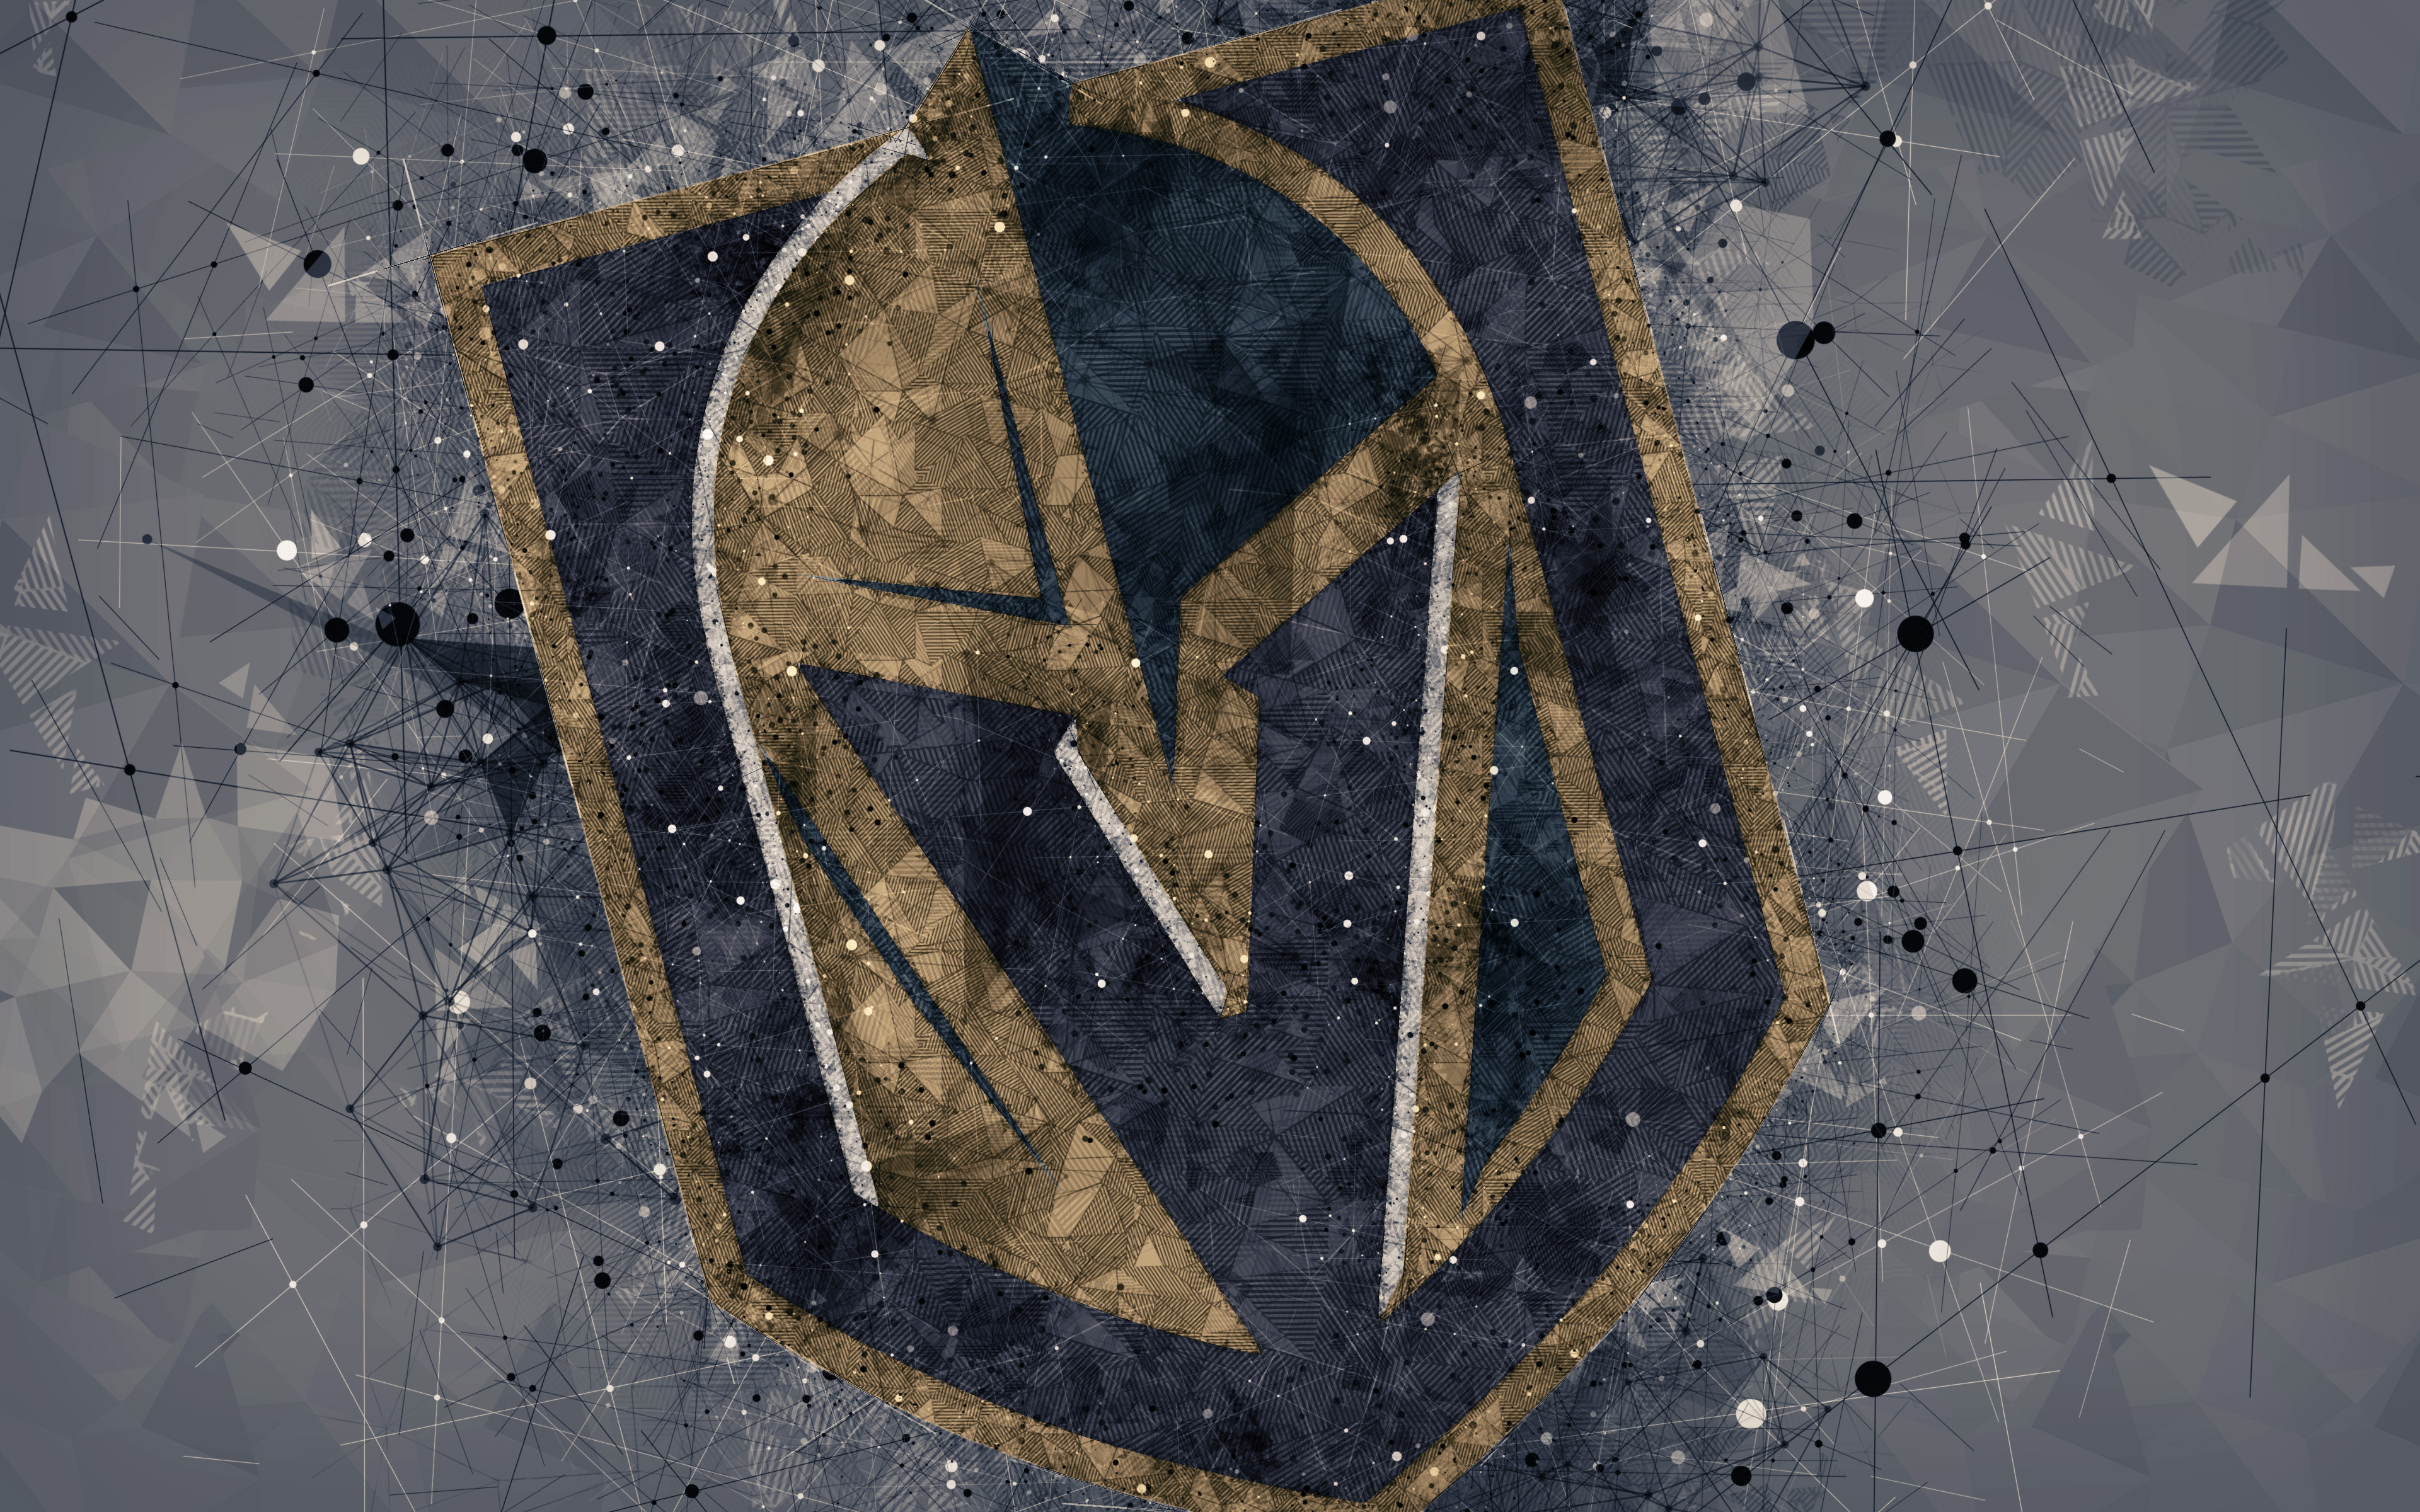 30+ Vegas Golden Knights HD Wallpapers and Backgrounds